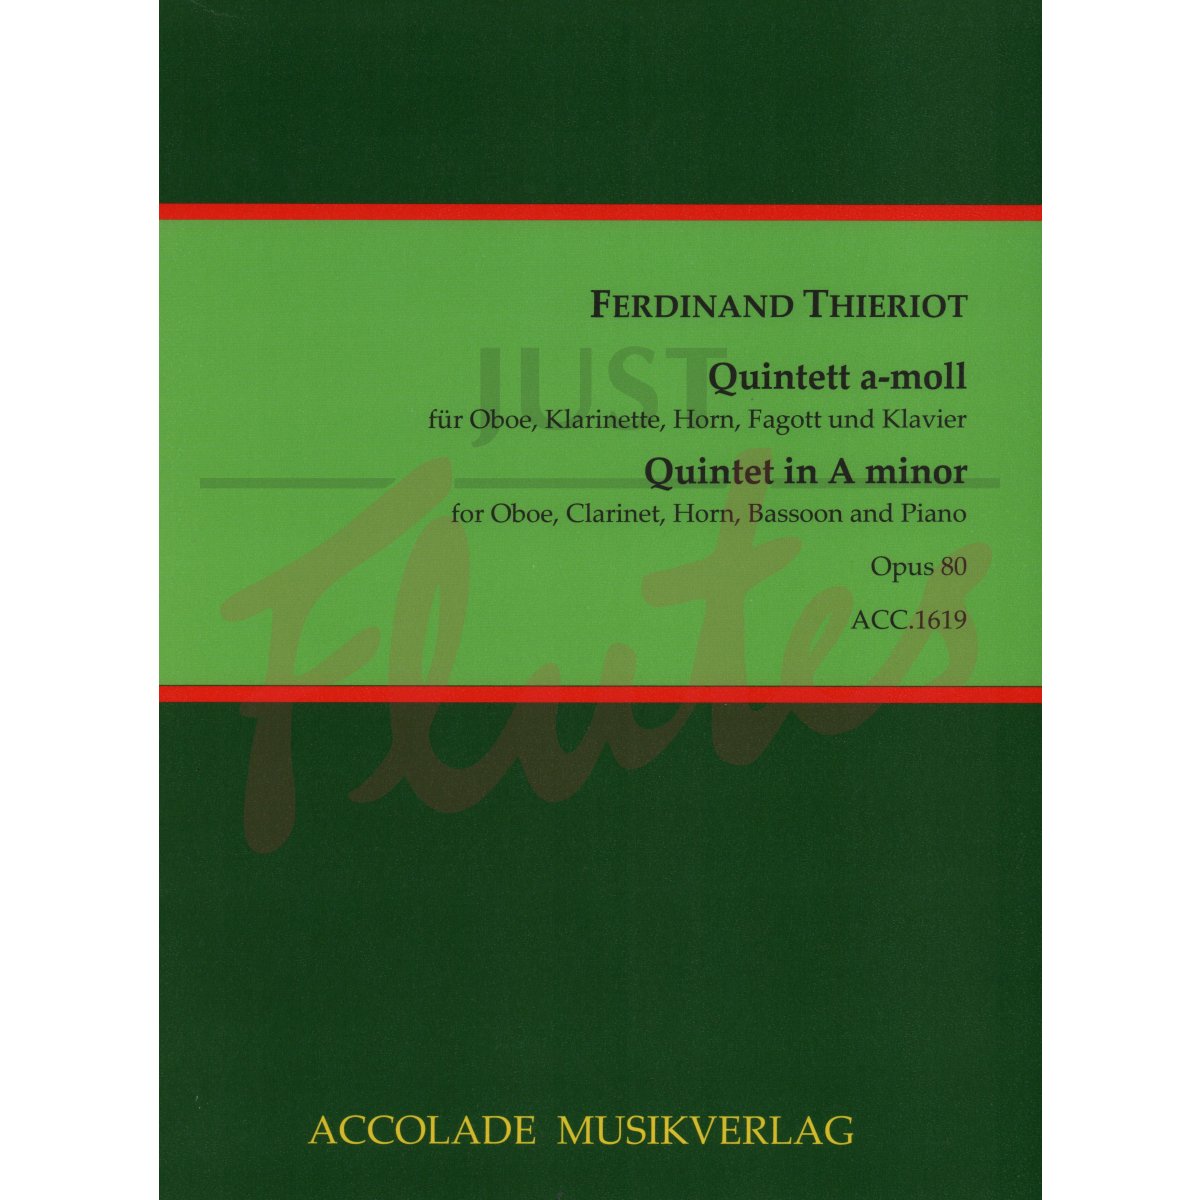 Quintet in A minor for Oboe, Clarinet, Horn, Bassoon and Piano